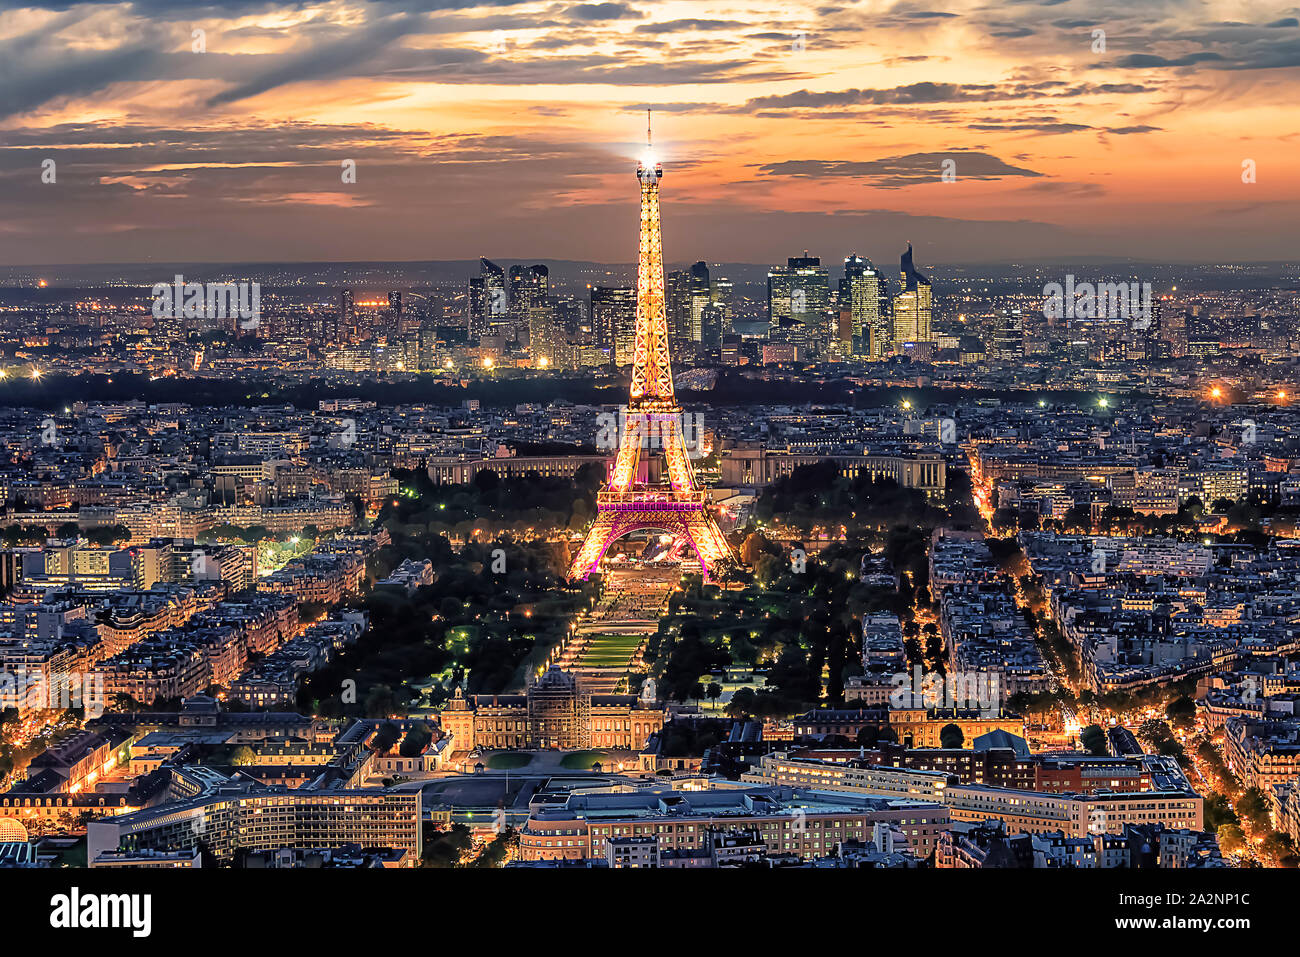 Paris city in the evening with the Eiffel tower and La Defense business district illuminated Stock Photo